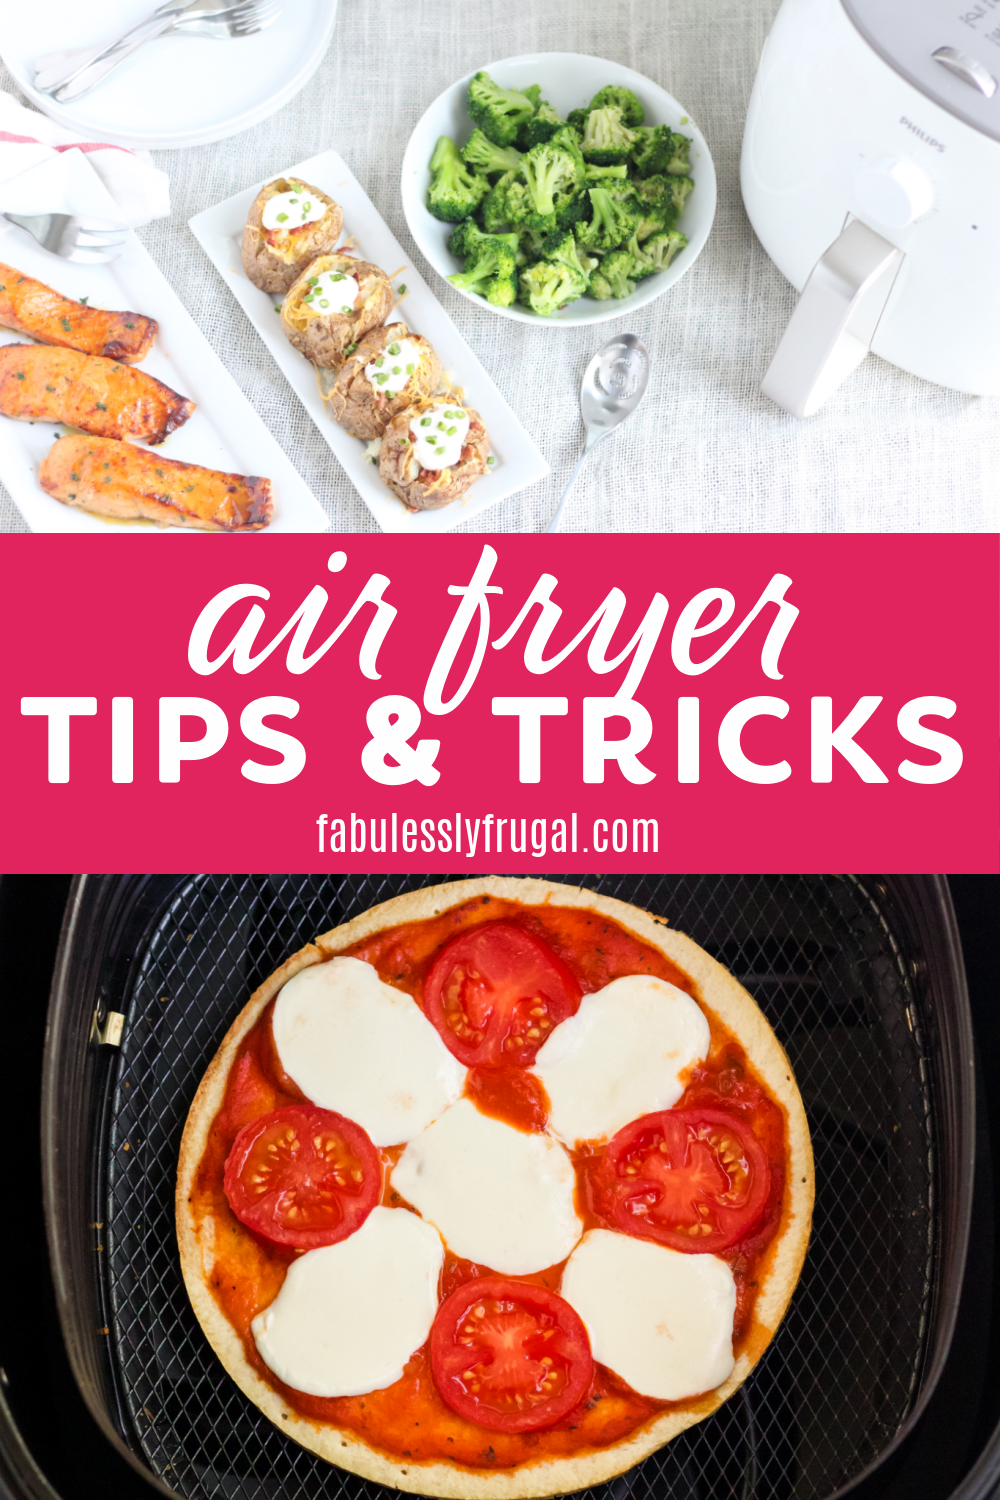 https://fabulesslyfrugal.com/wp-content/uploads/2020/11/air-fryer-tips-and-tricks.png